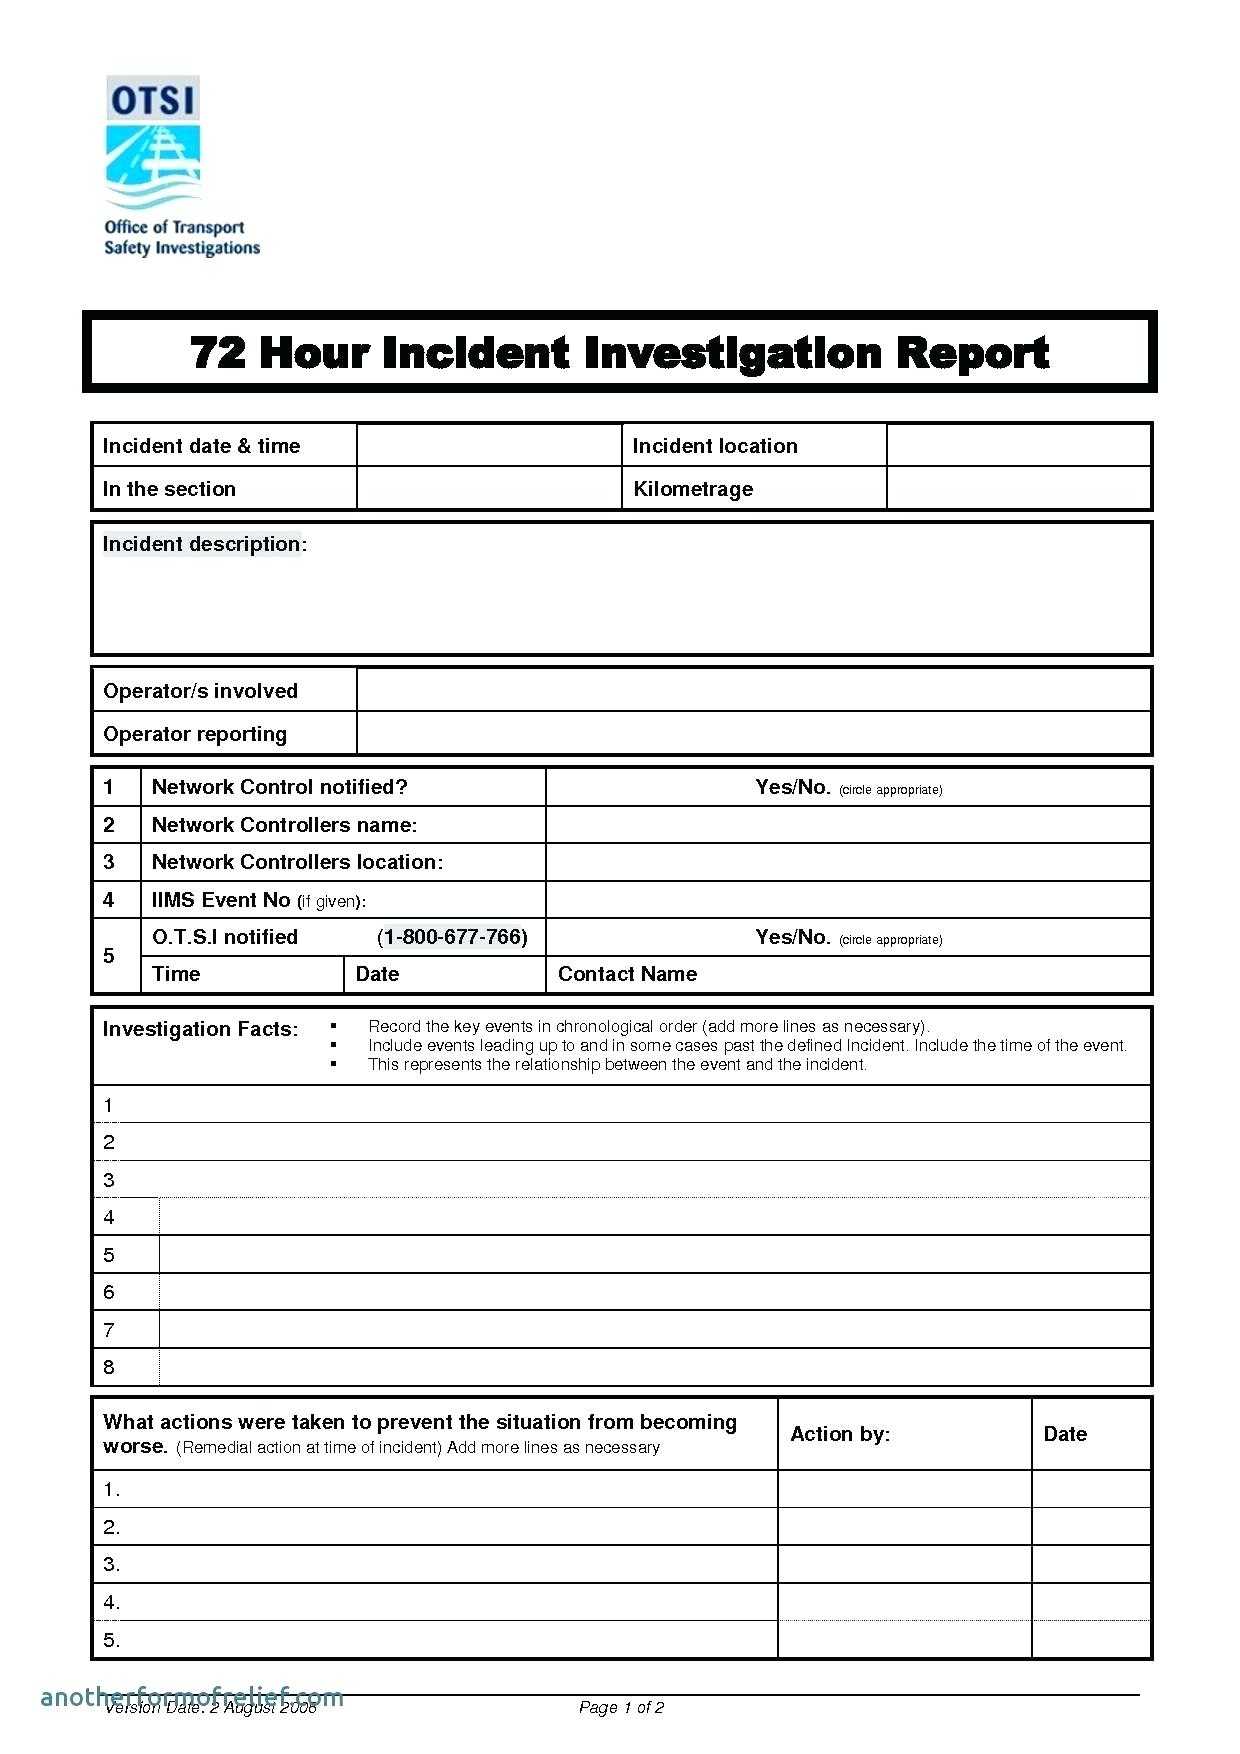 Crime Scene Report Sample 211805 Examples Images Of Template Inside Crime Scene Report Template